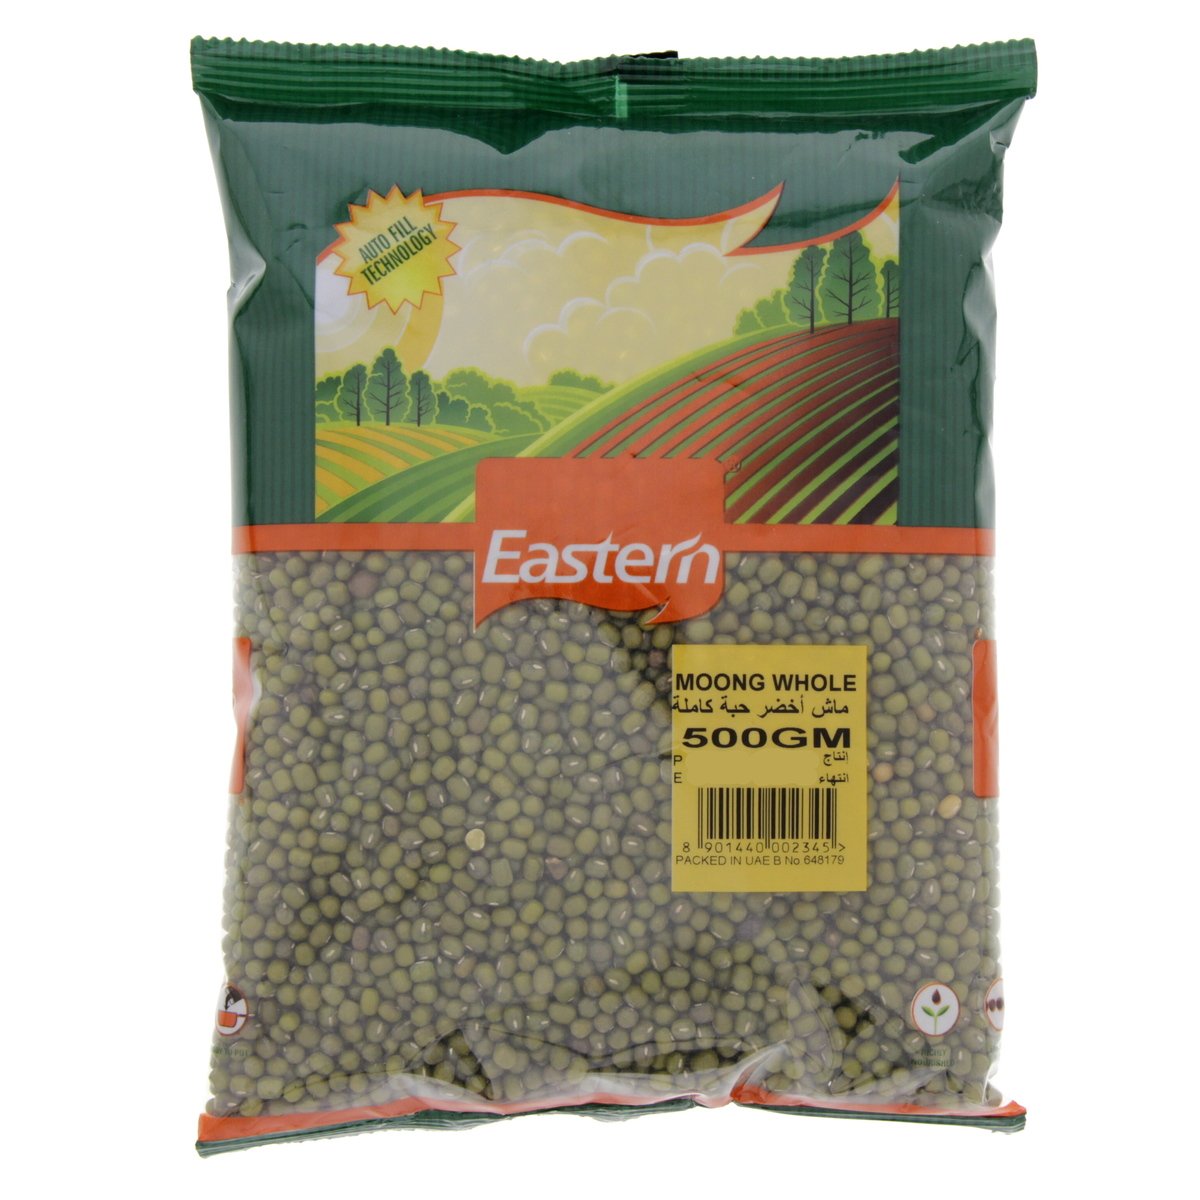 Eastern Moong Whole 500 g